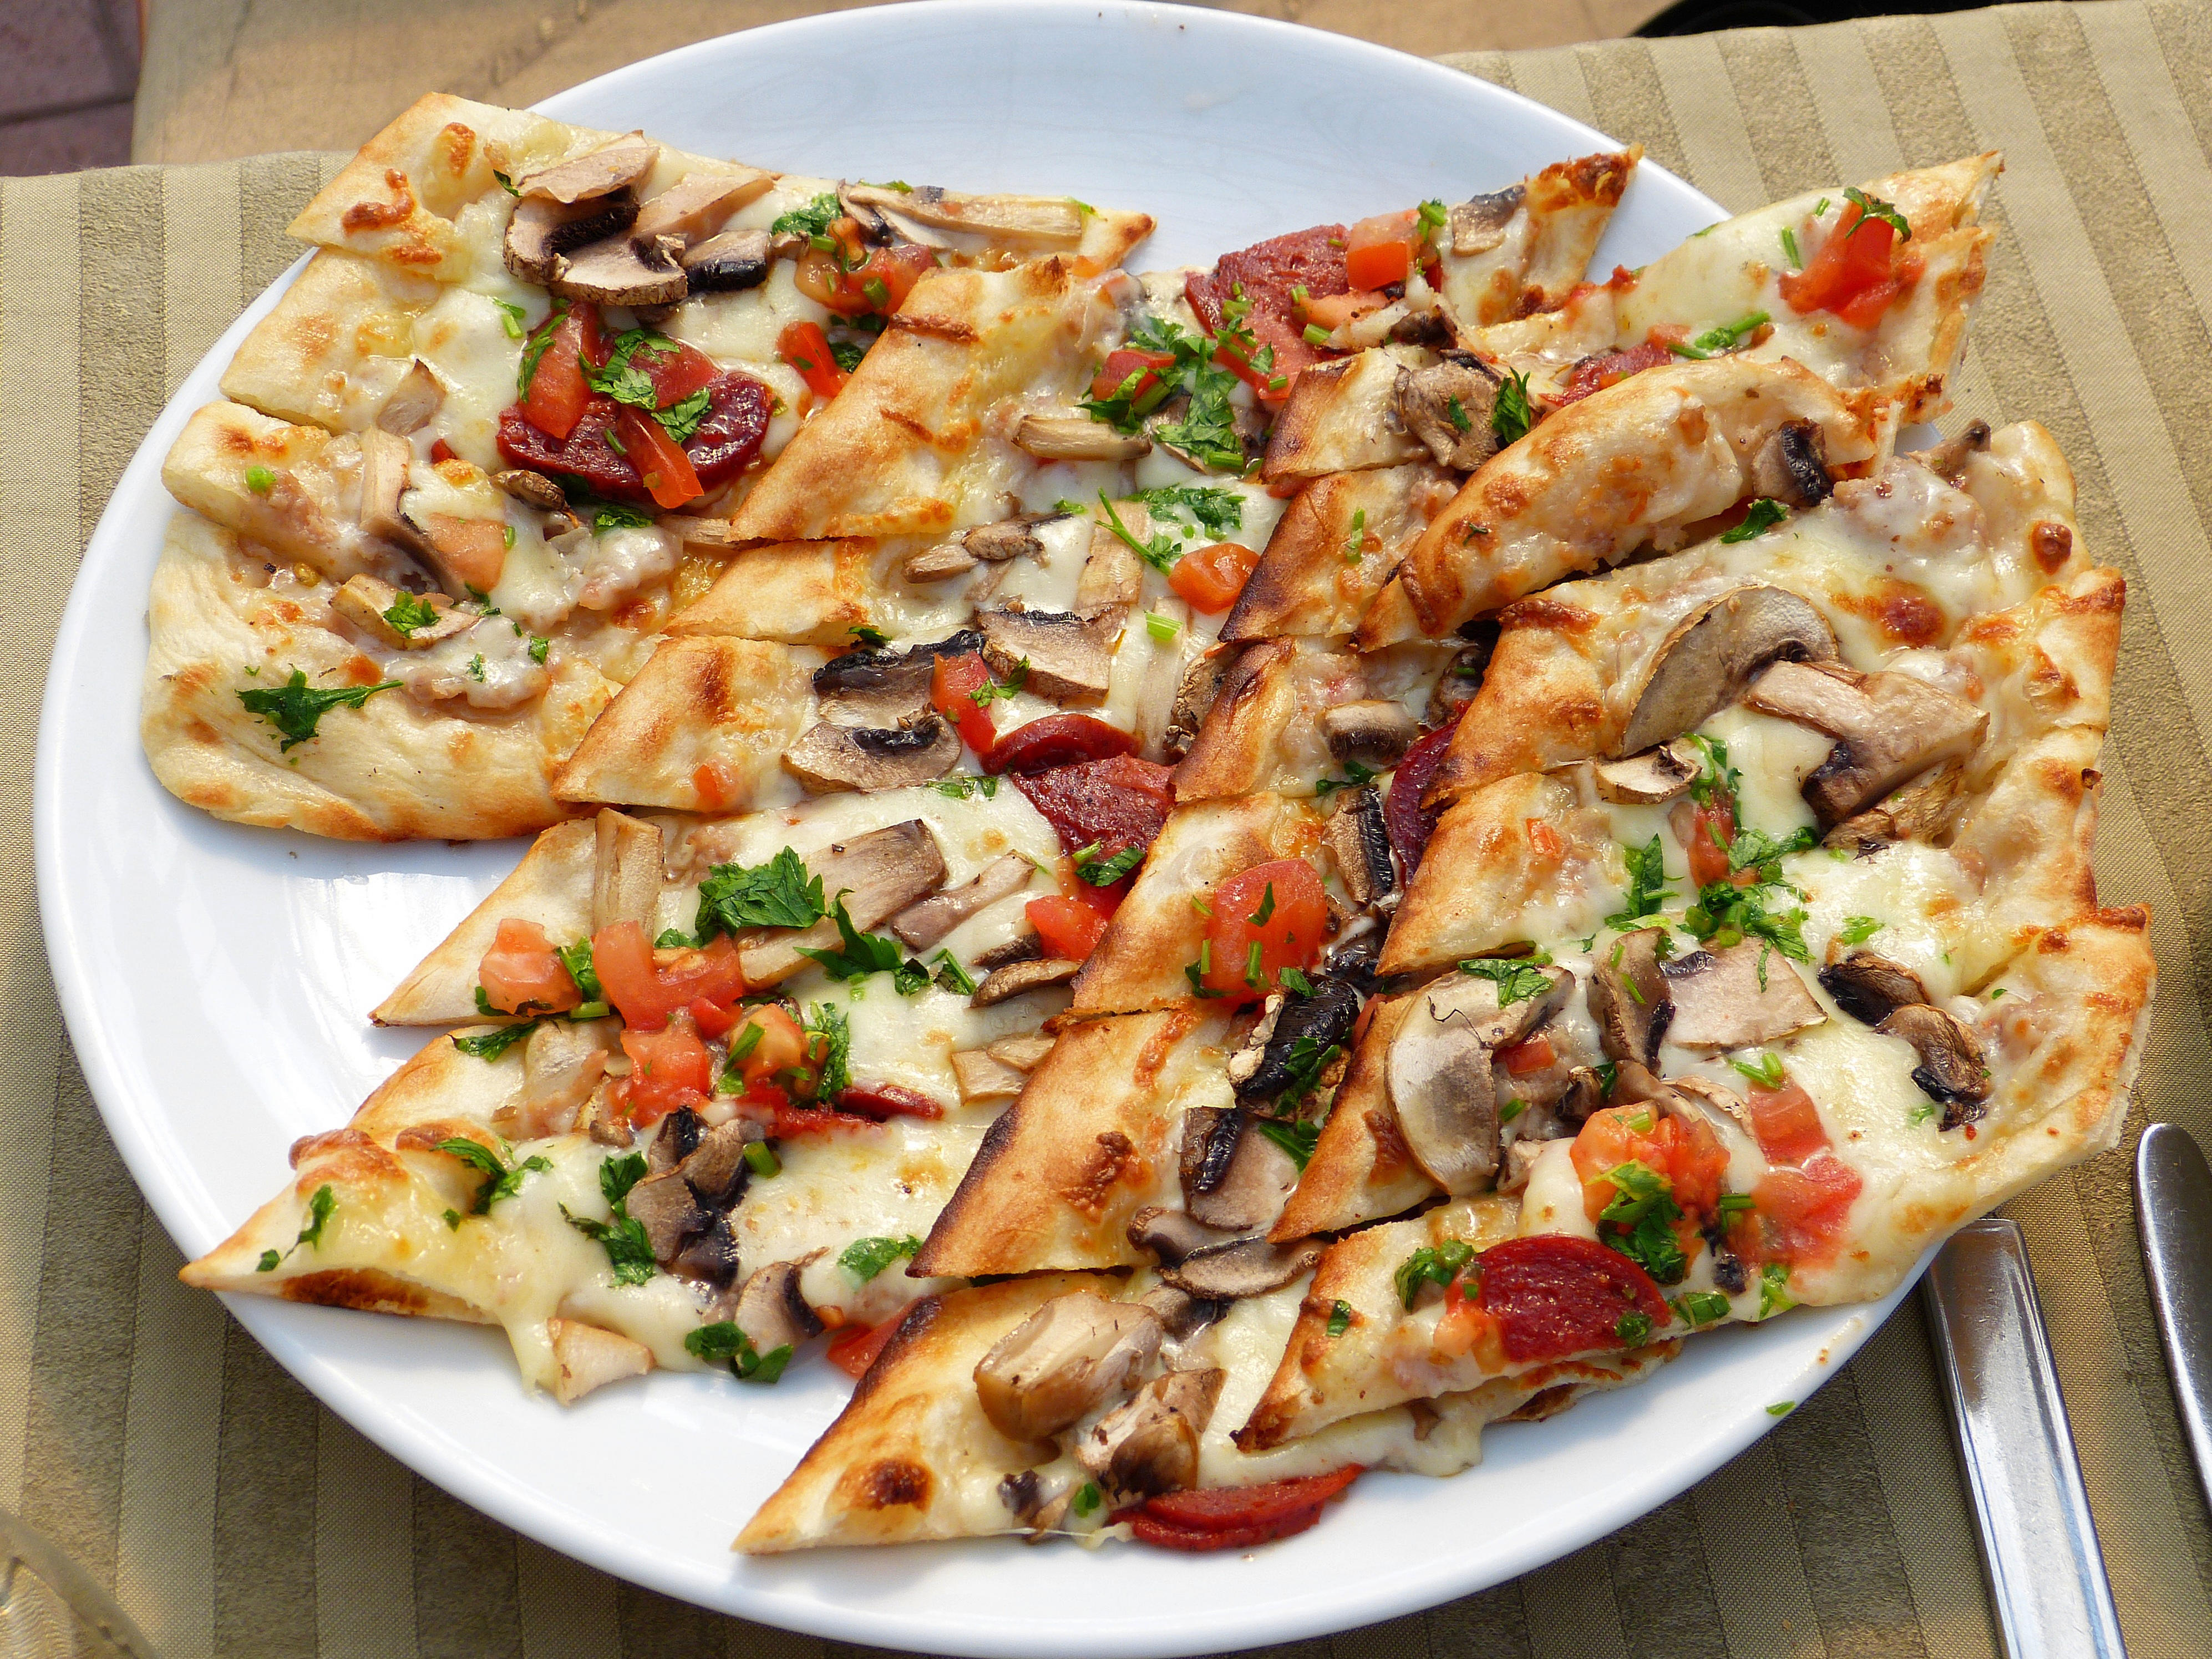 Plate of mixed pide in Turkey.